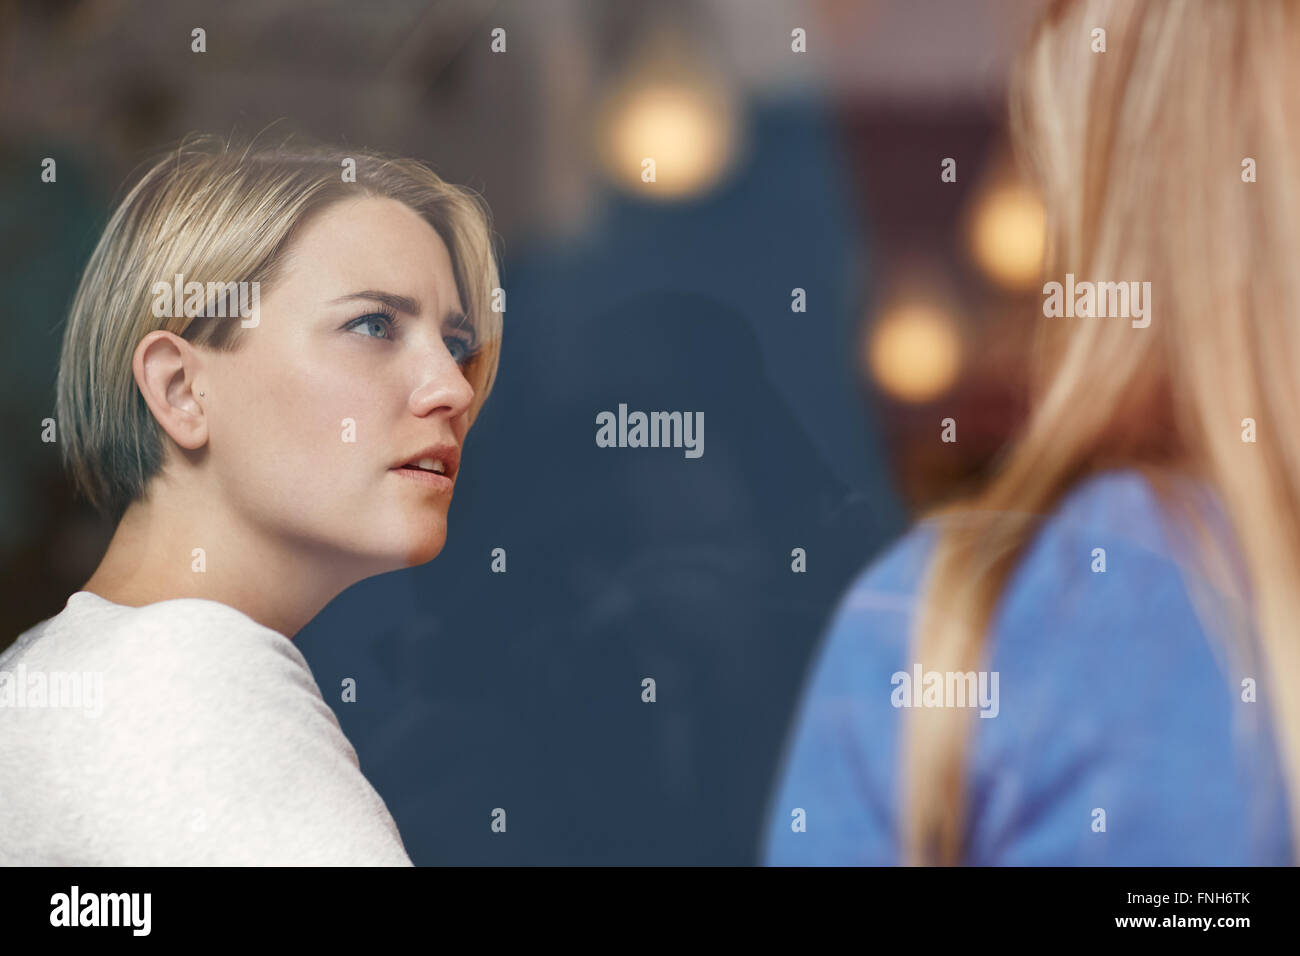 Woman looking concerned while listening carefully to her friend Stock Photo